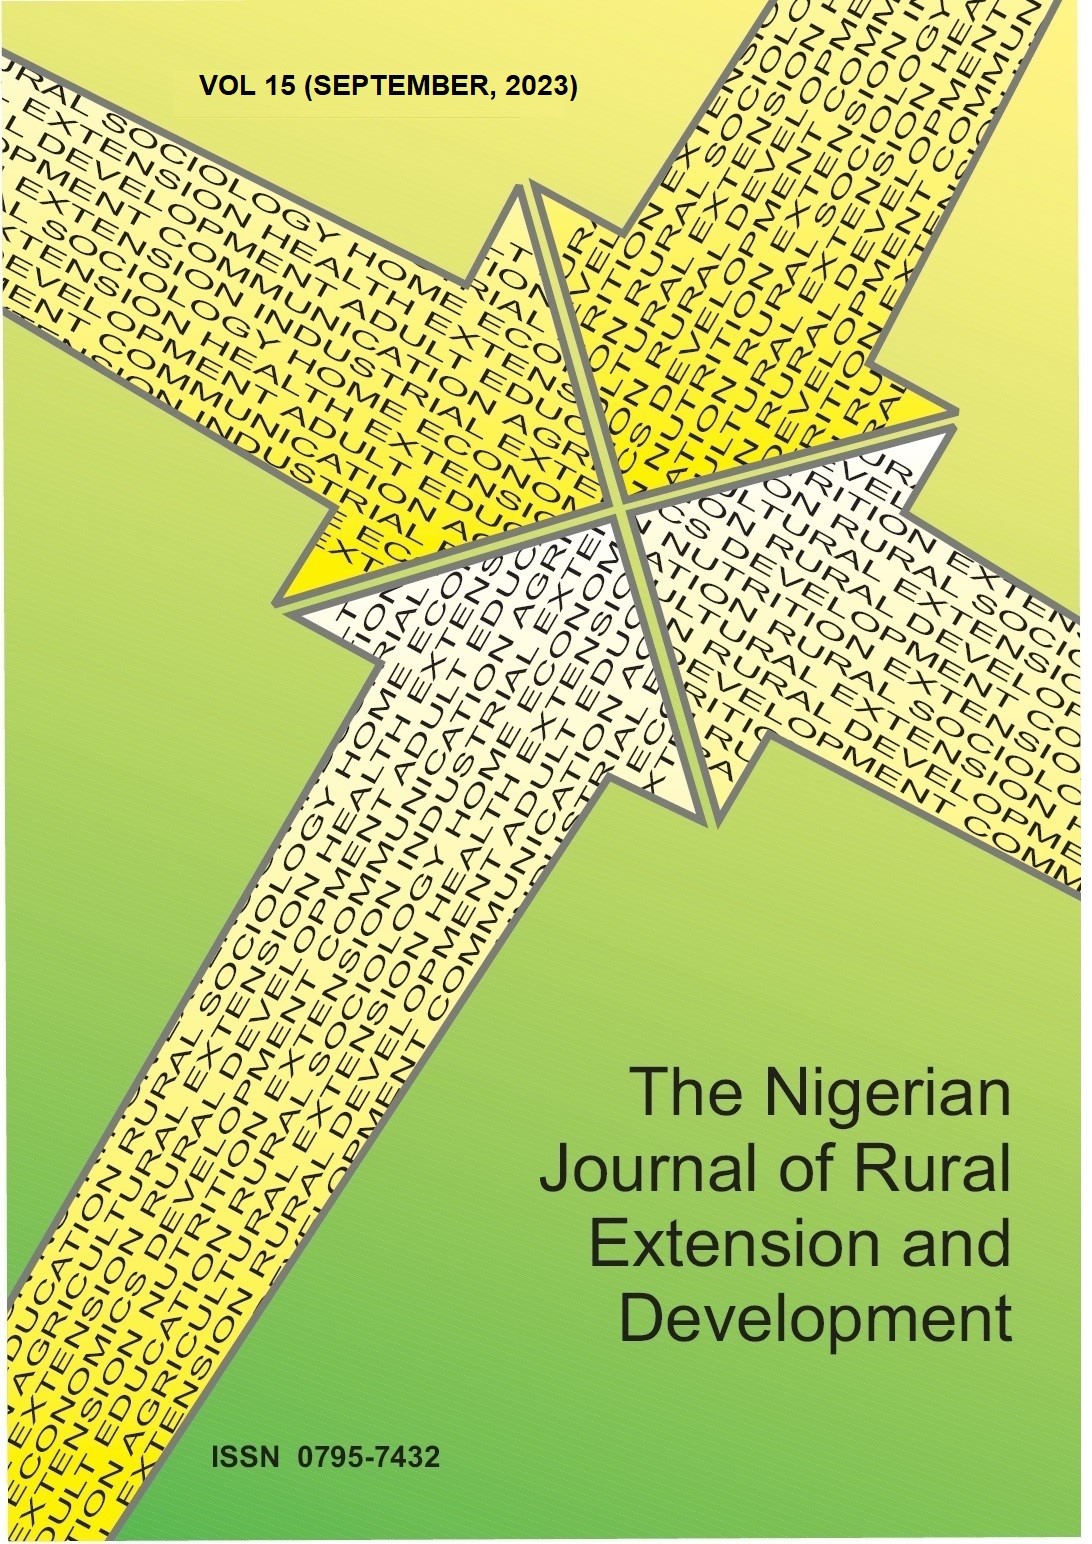 					View Vol. 15 No. 1 (2023): The Nigerian Journal of Rural Extension and Development (NJRED)
				